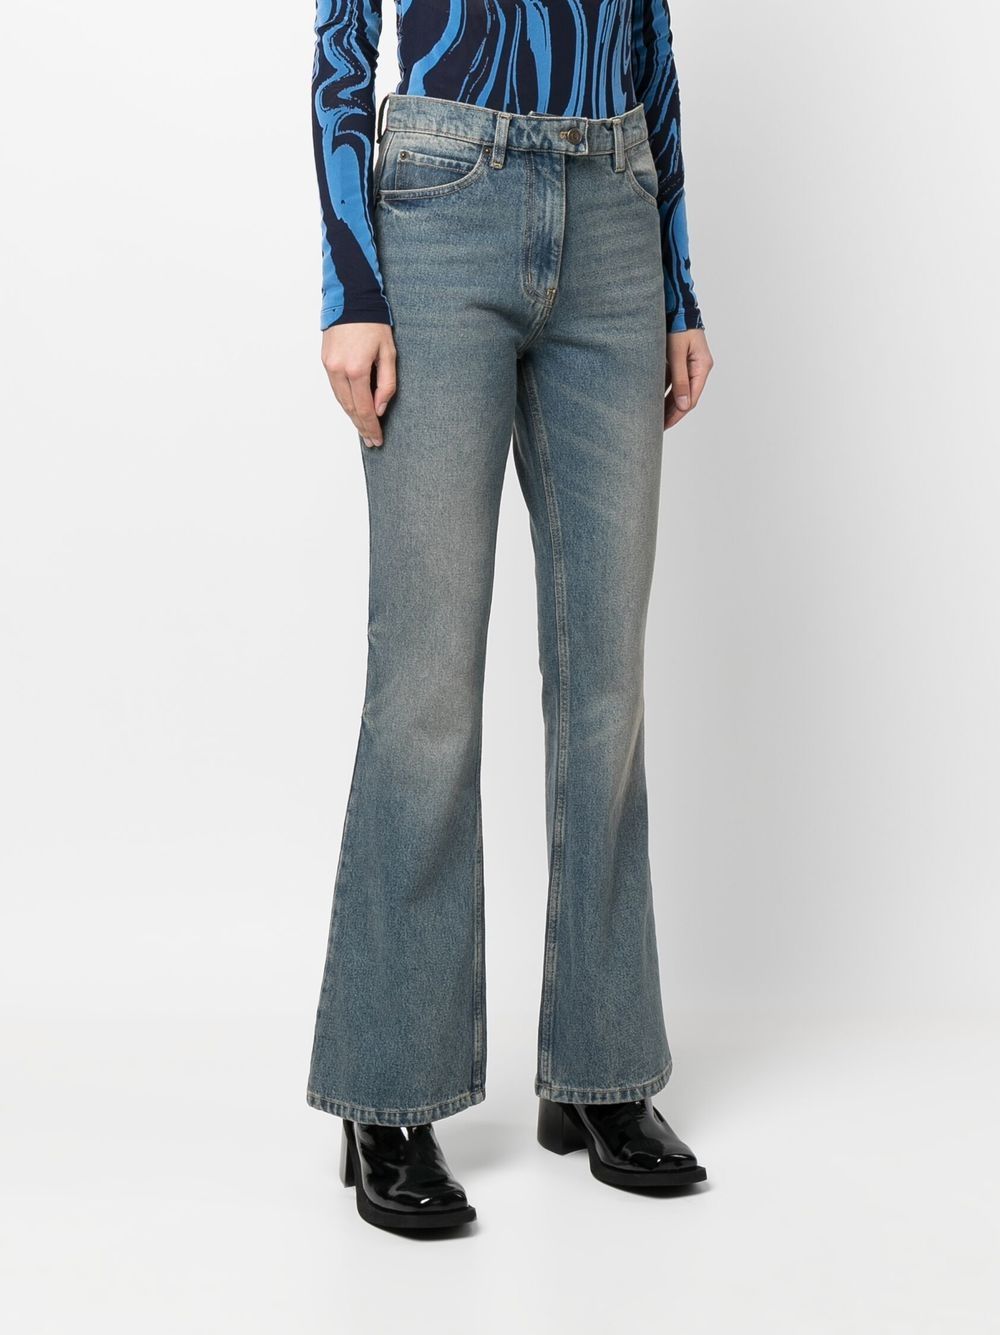 Courrèges Distressed Flared Leg Jeans - Farfetch